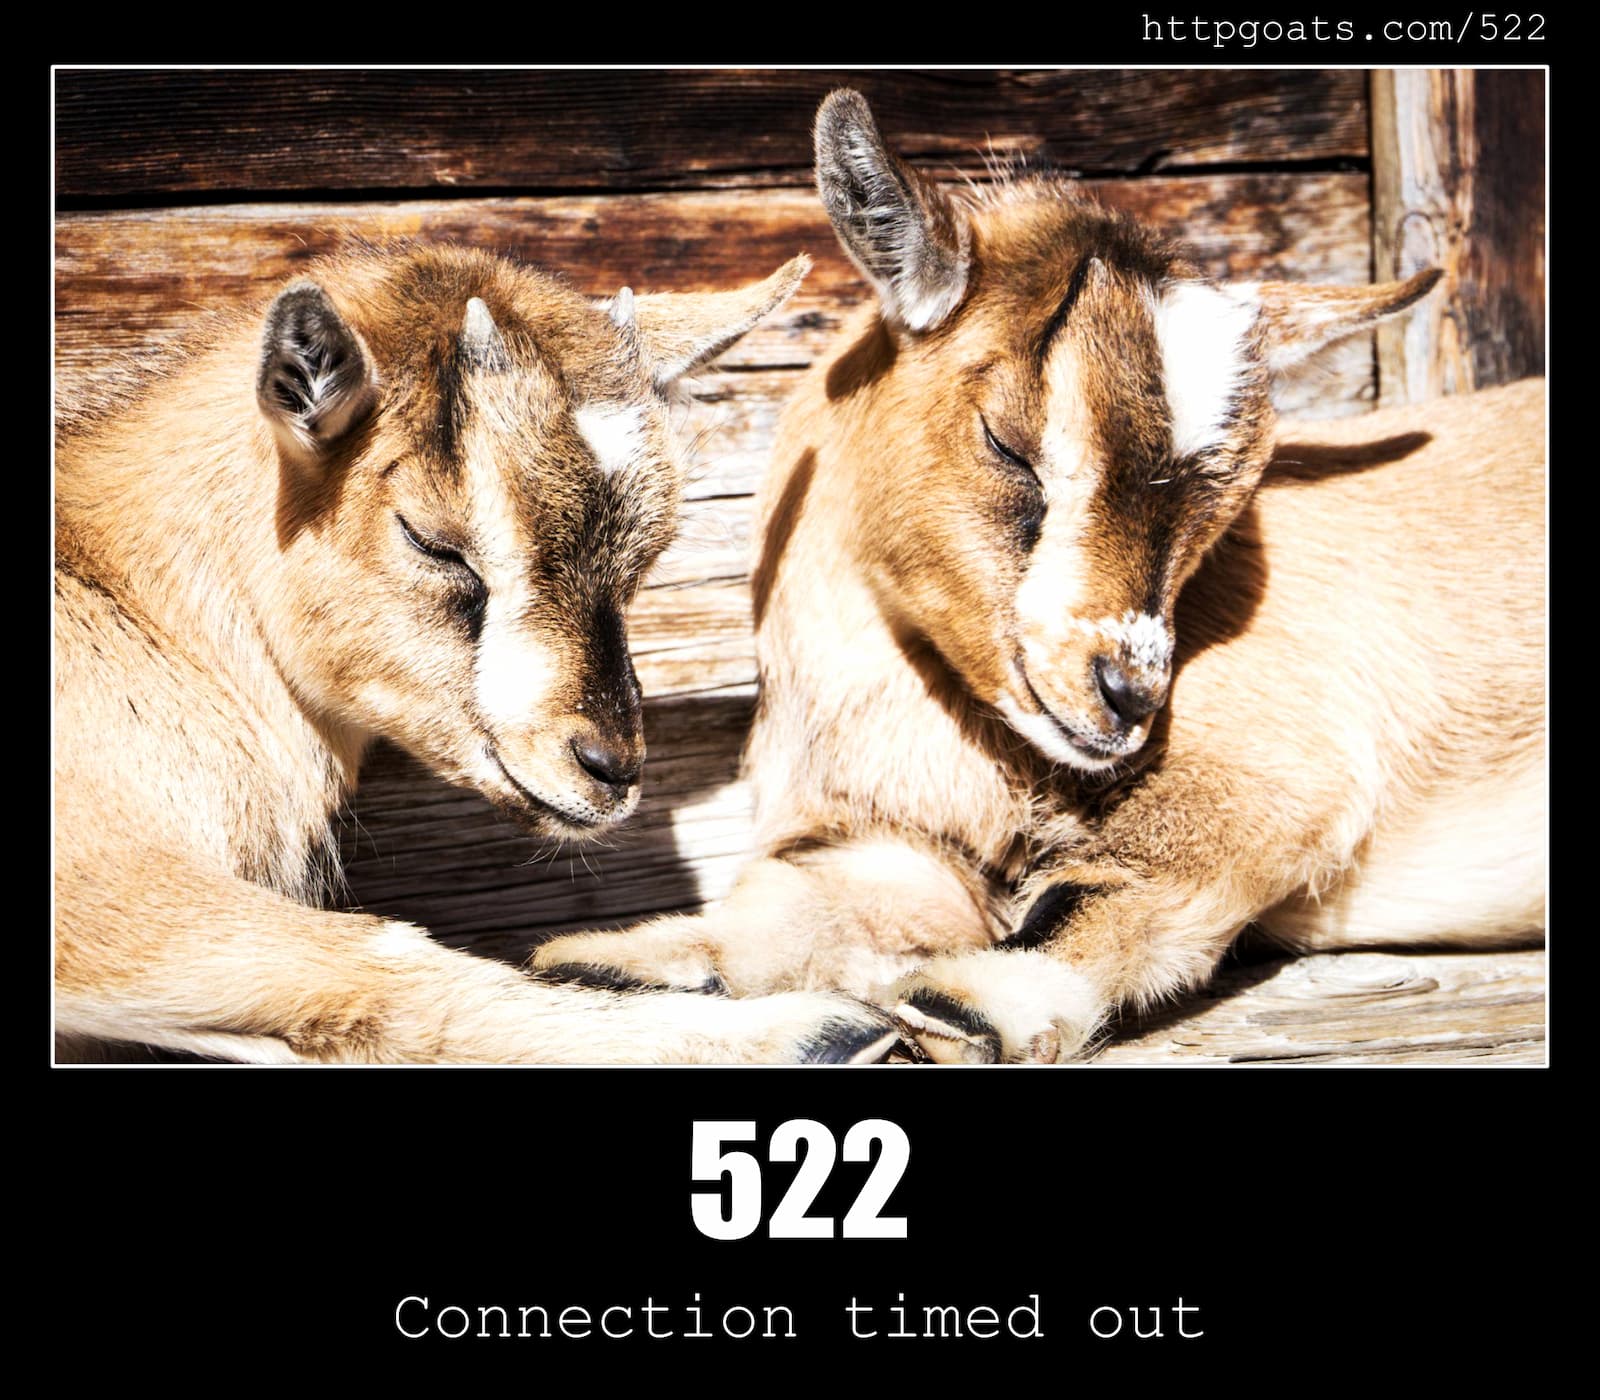 HTTP Status Code 522 Connection timed out & Goats